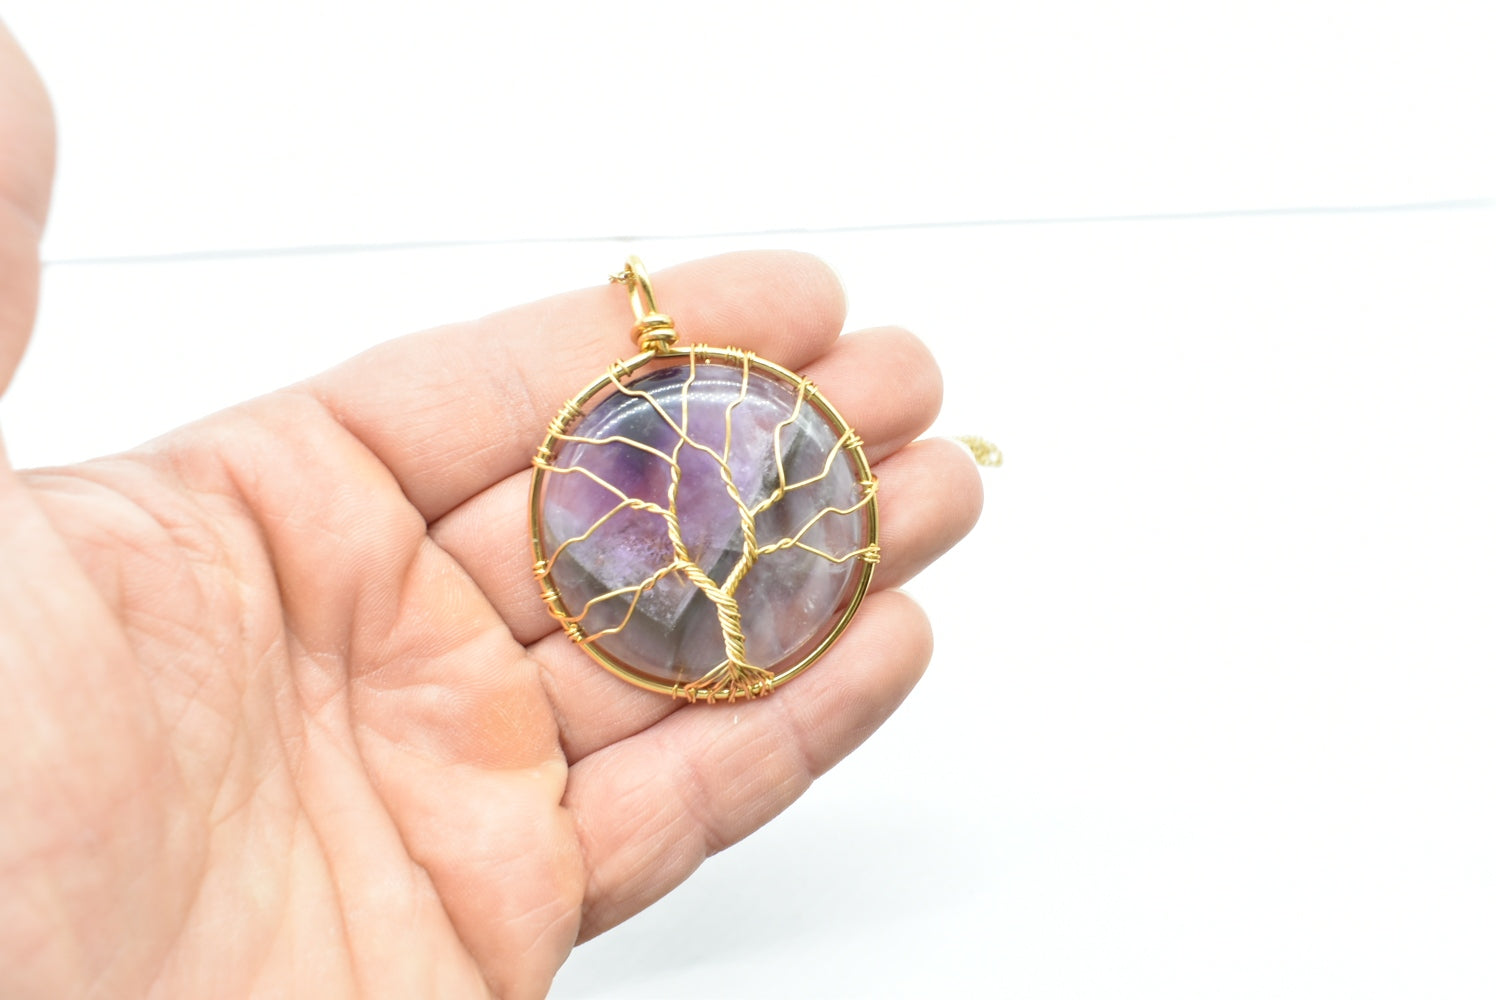 Amethyst plate pendant with tree of life symbol